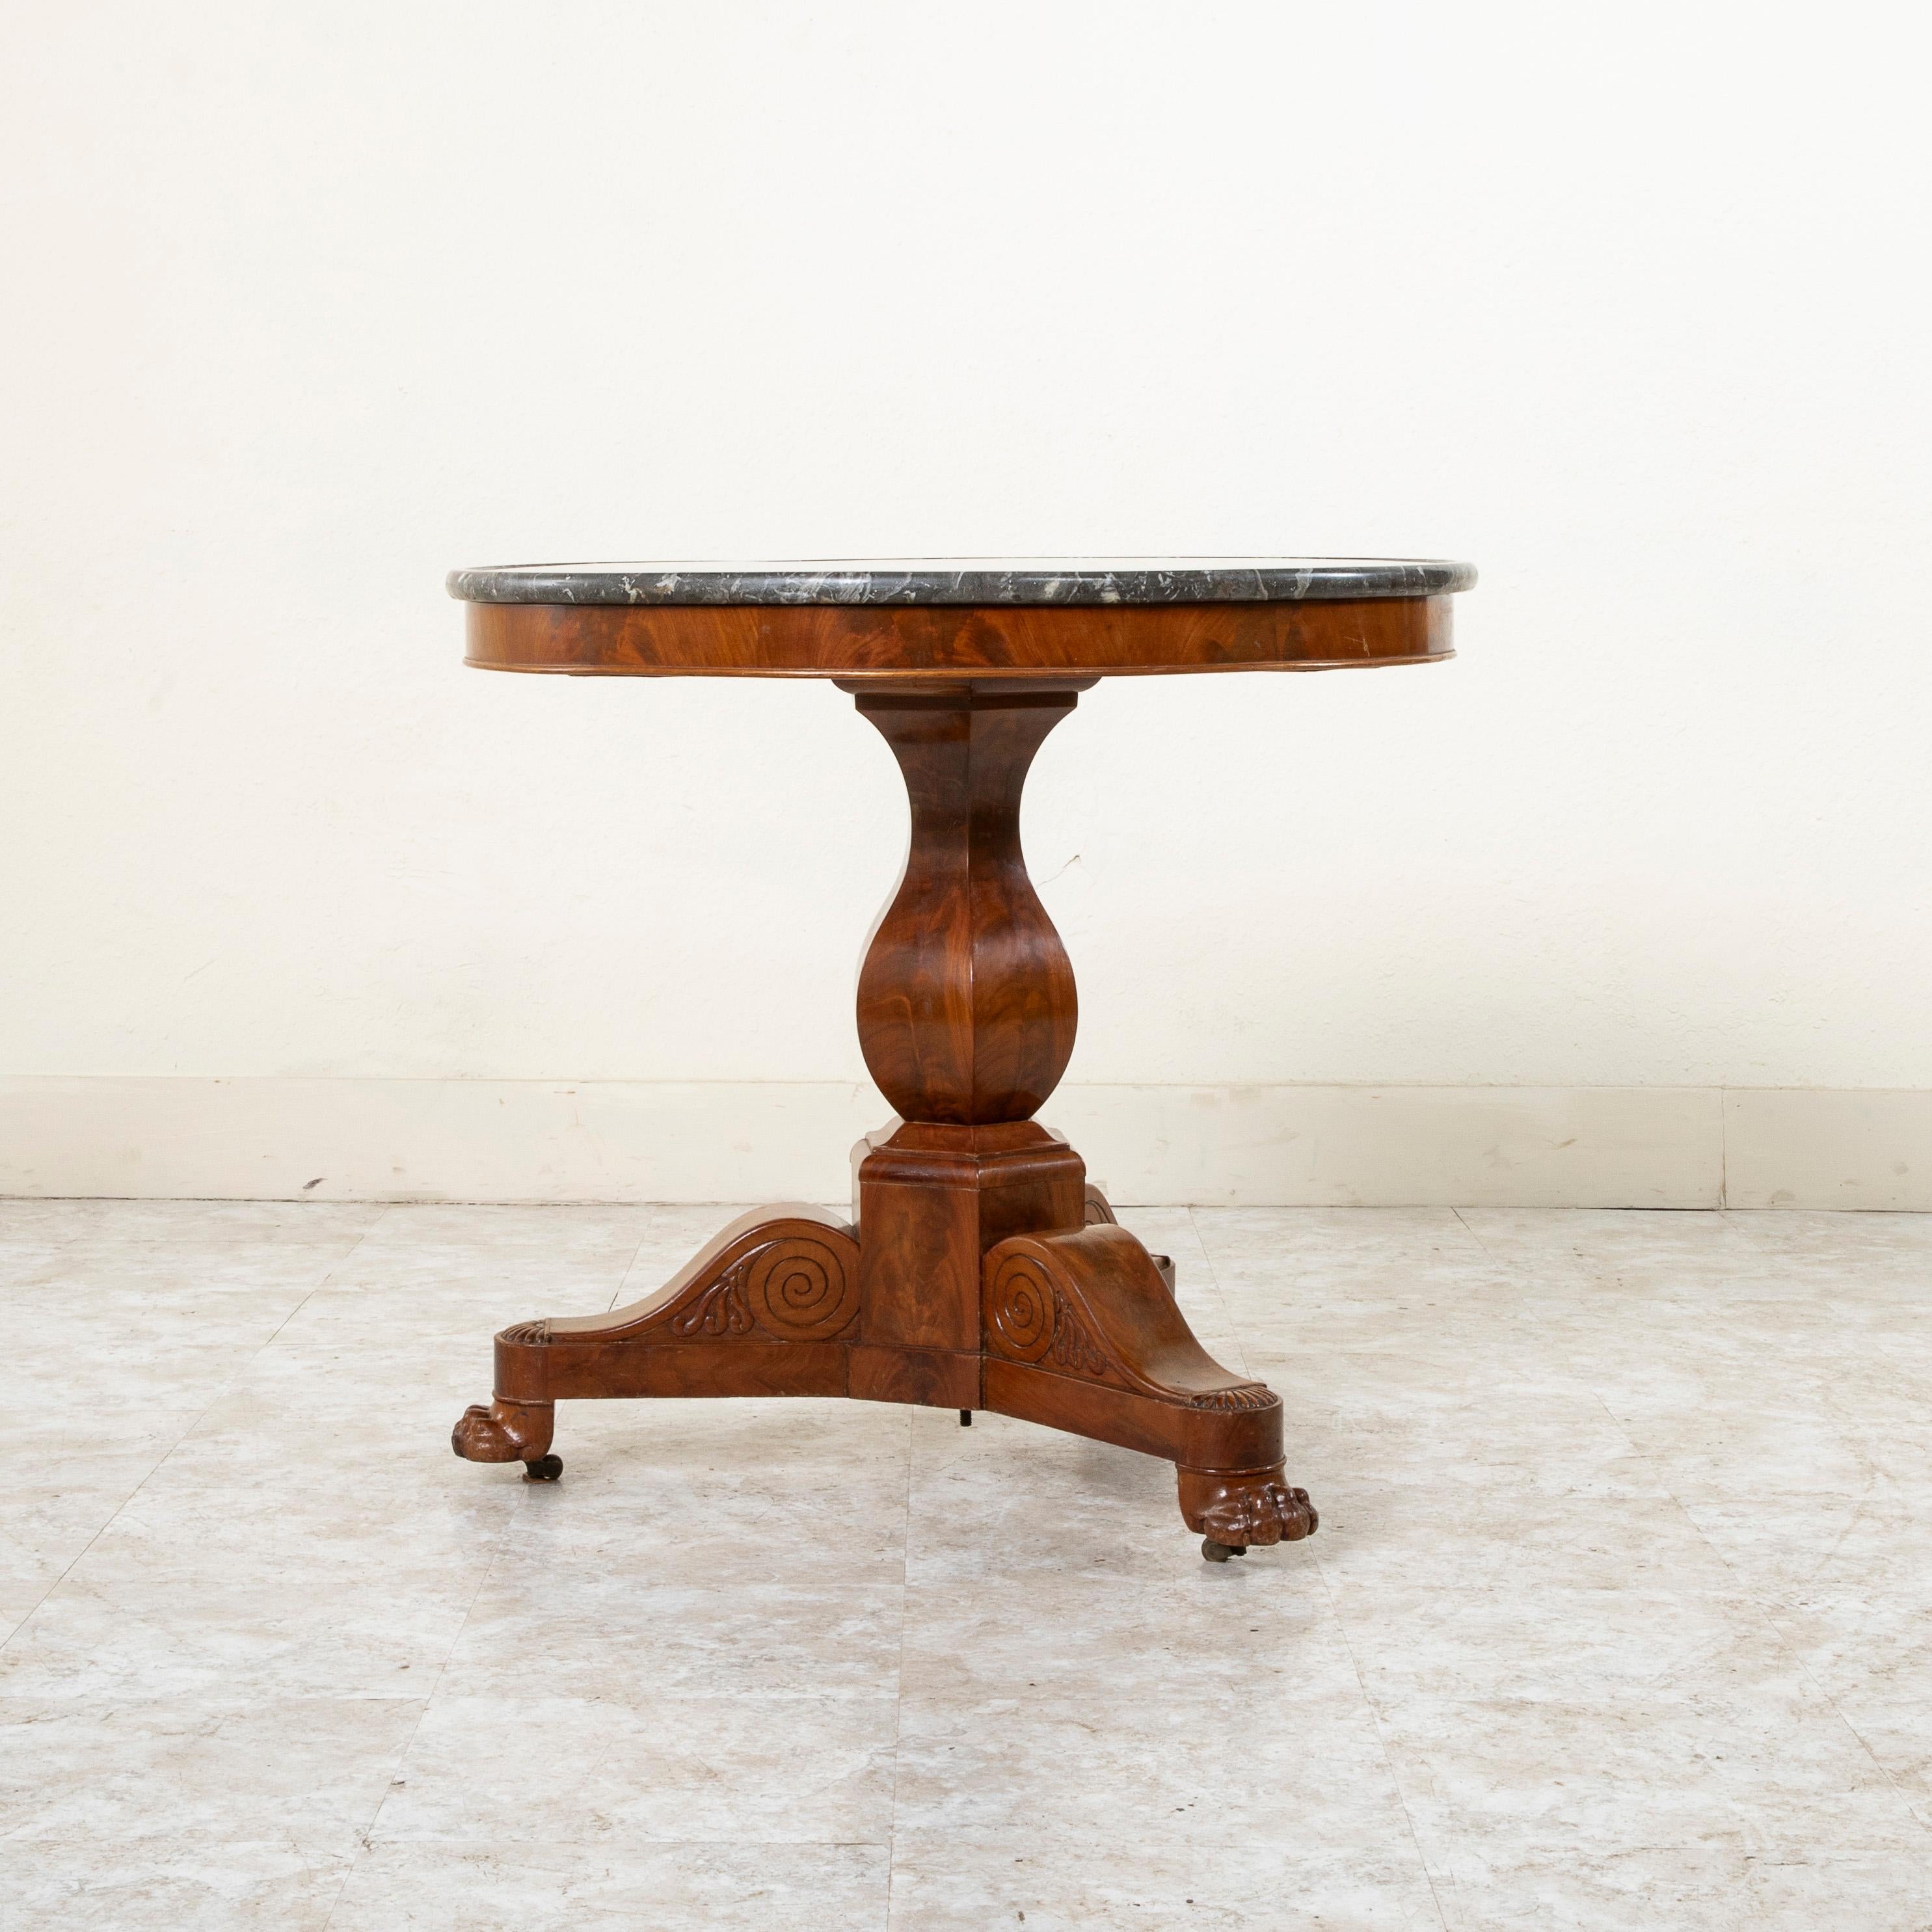 Beveled Mid-19th Century French Restauration Period Mahogany and Marble Pedestal Table For Sale